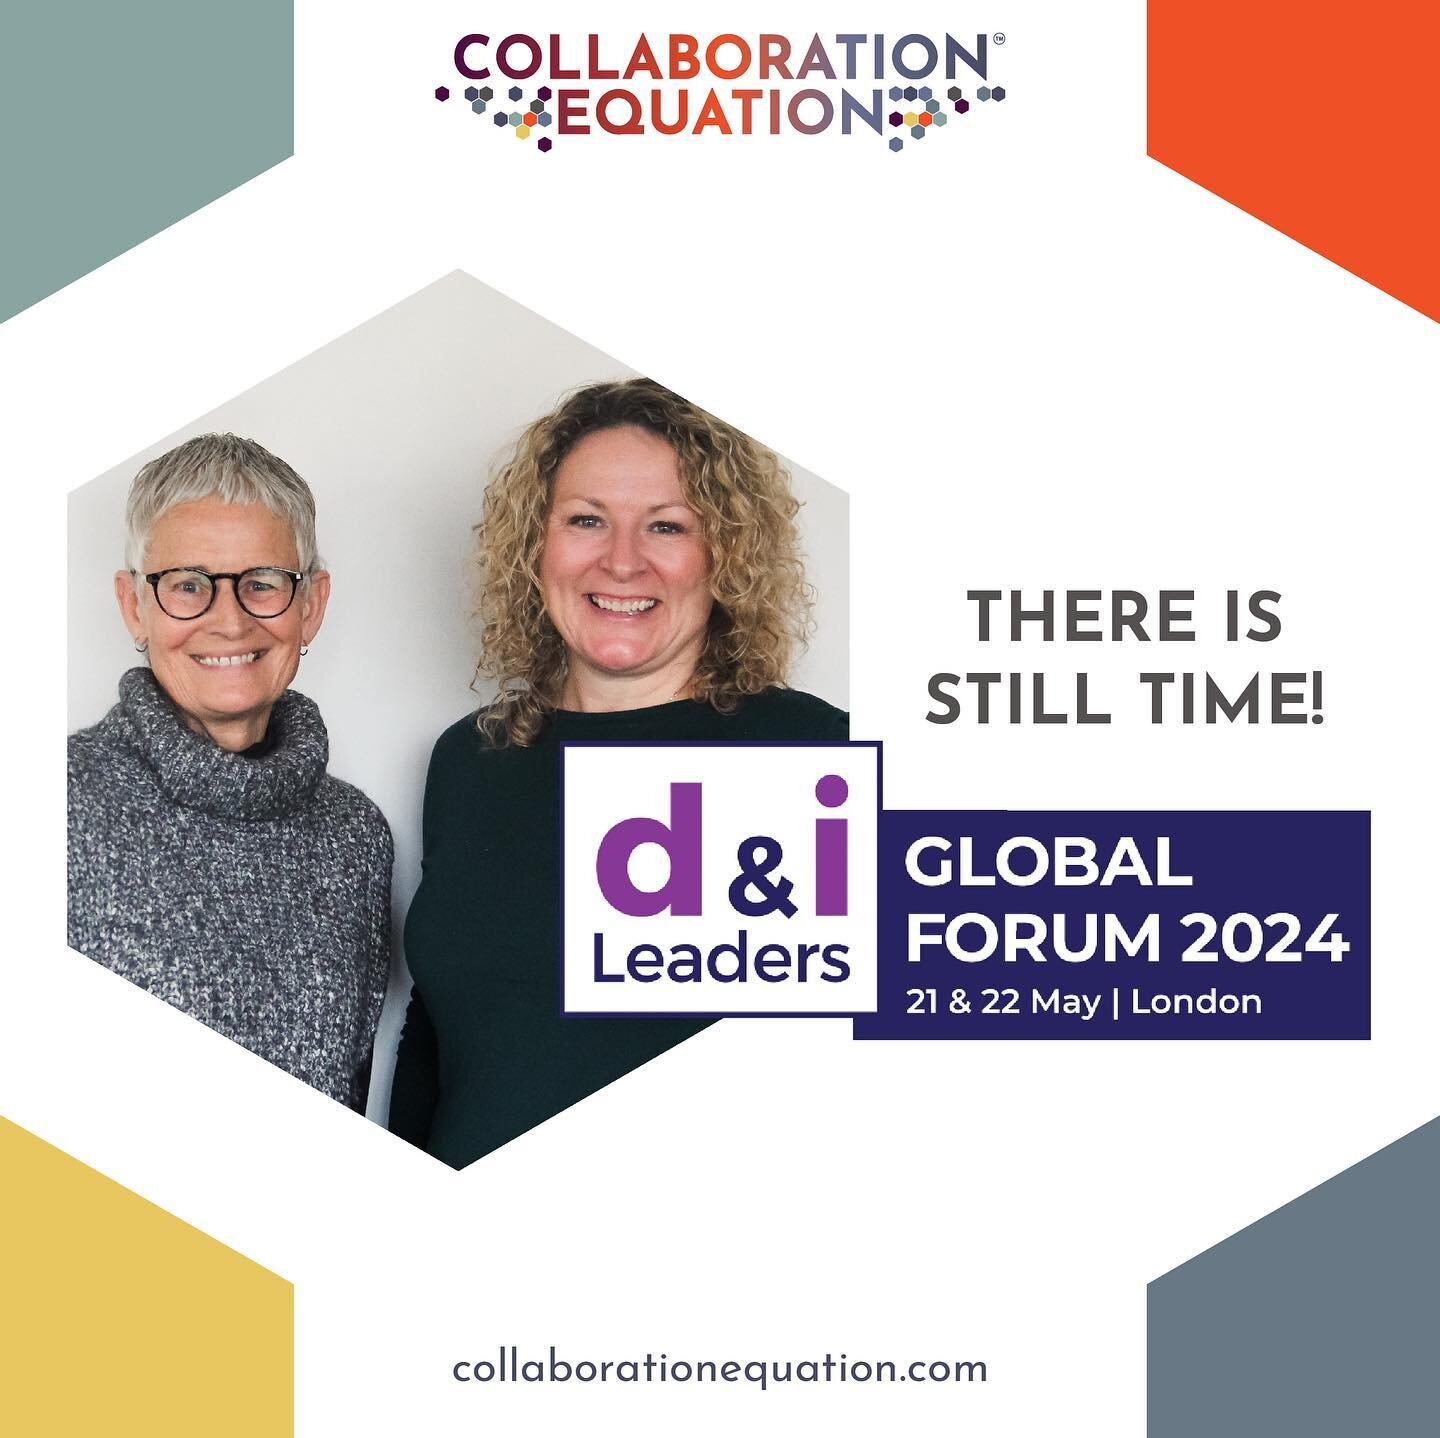 Until tomorrow&hellip;

The 2024 @di_leaders Global Forum is still offering a &pound;100 discount if you purchase your ticket before tomorrow, April 5th. 

Together with Lucy Kidd, I will be showcasing our Collaboration Equation&trade; as one of 16 e